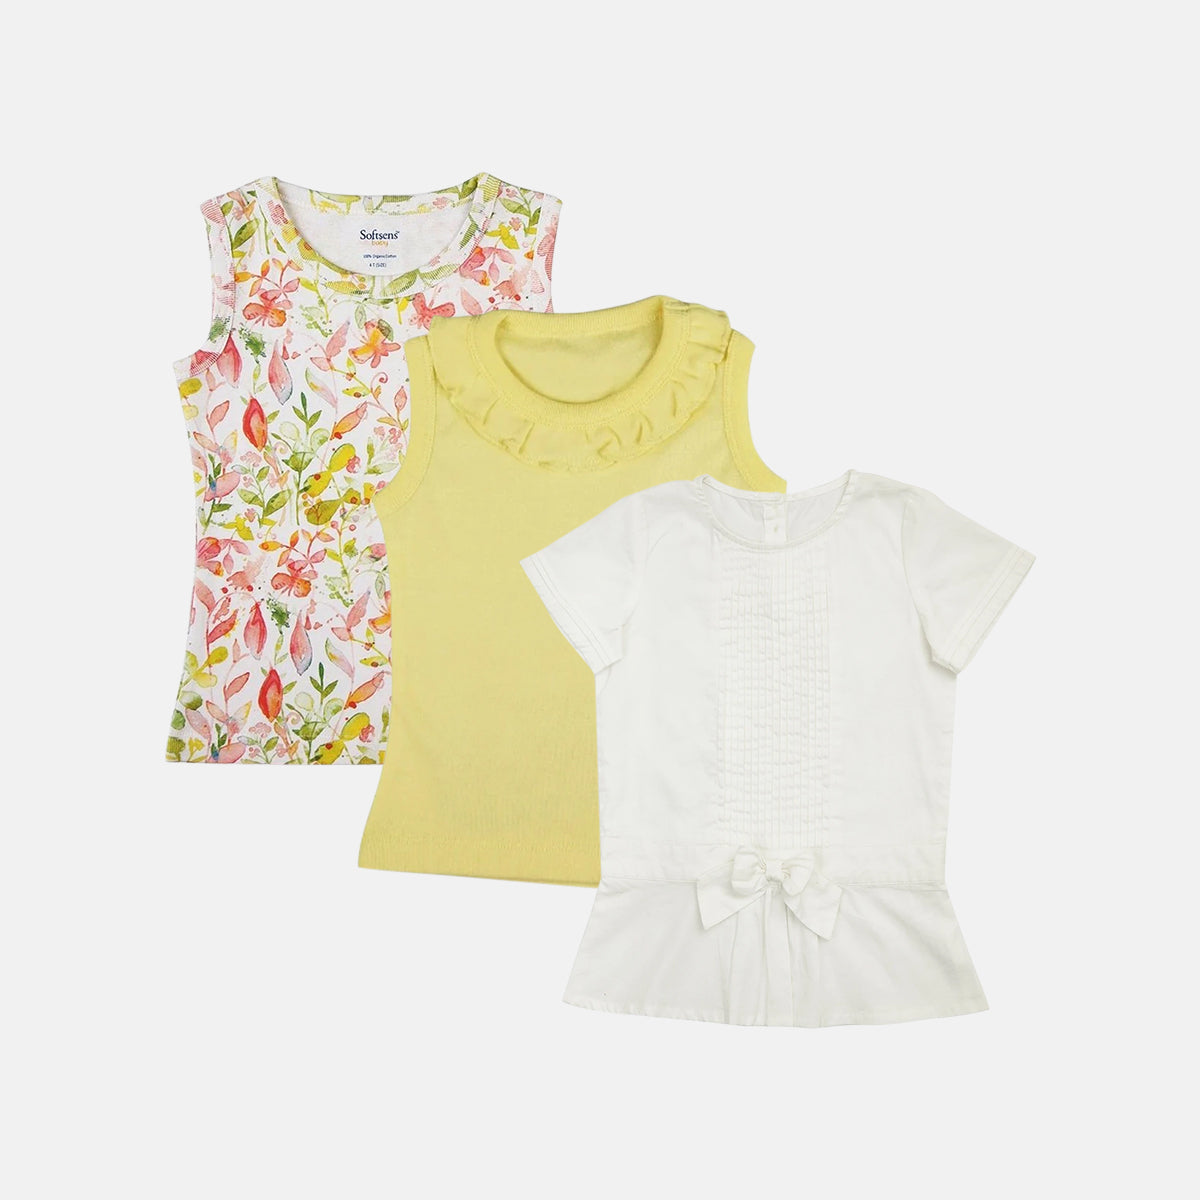 Pack of 3 Organic Cotton Tops for Little Girls